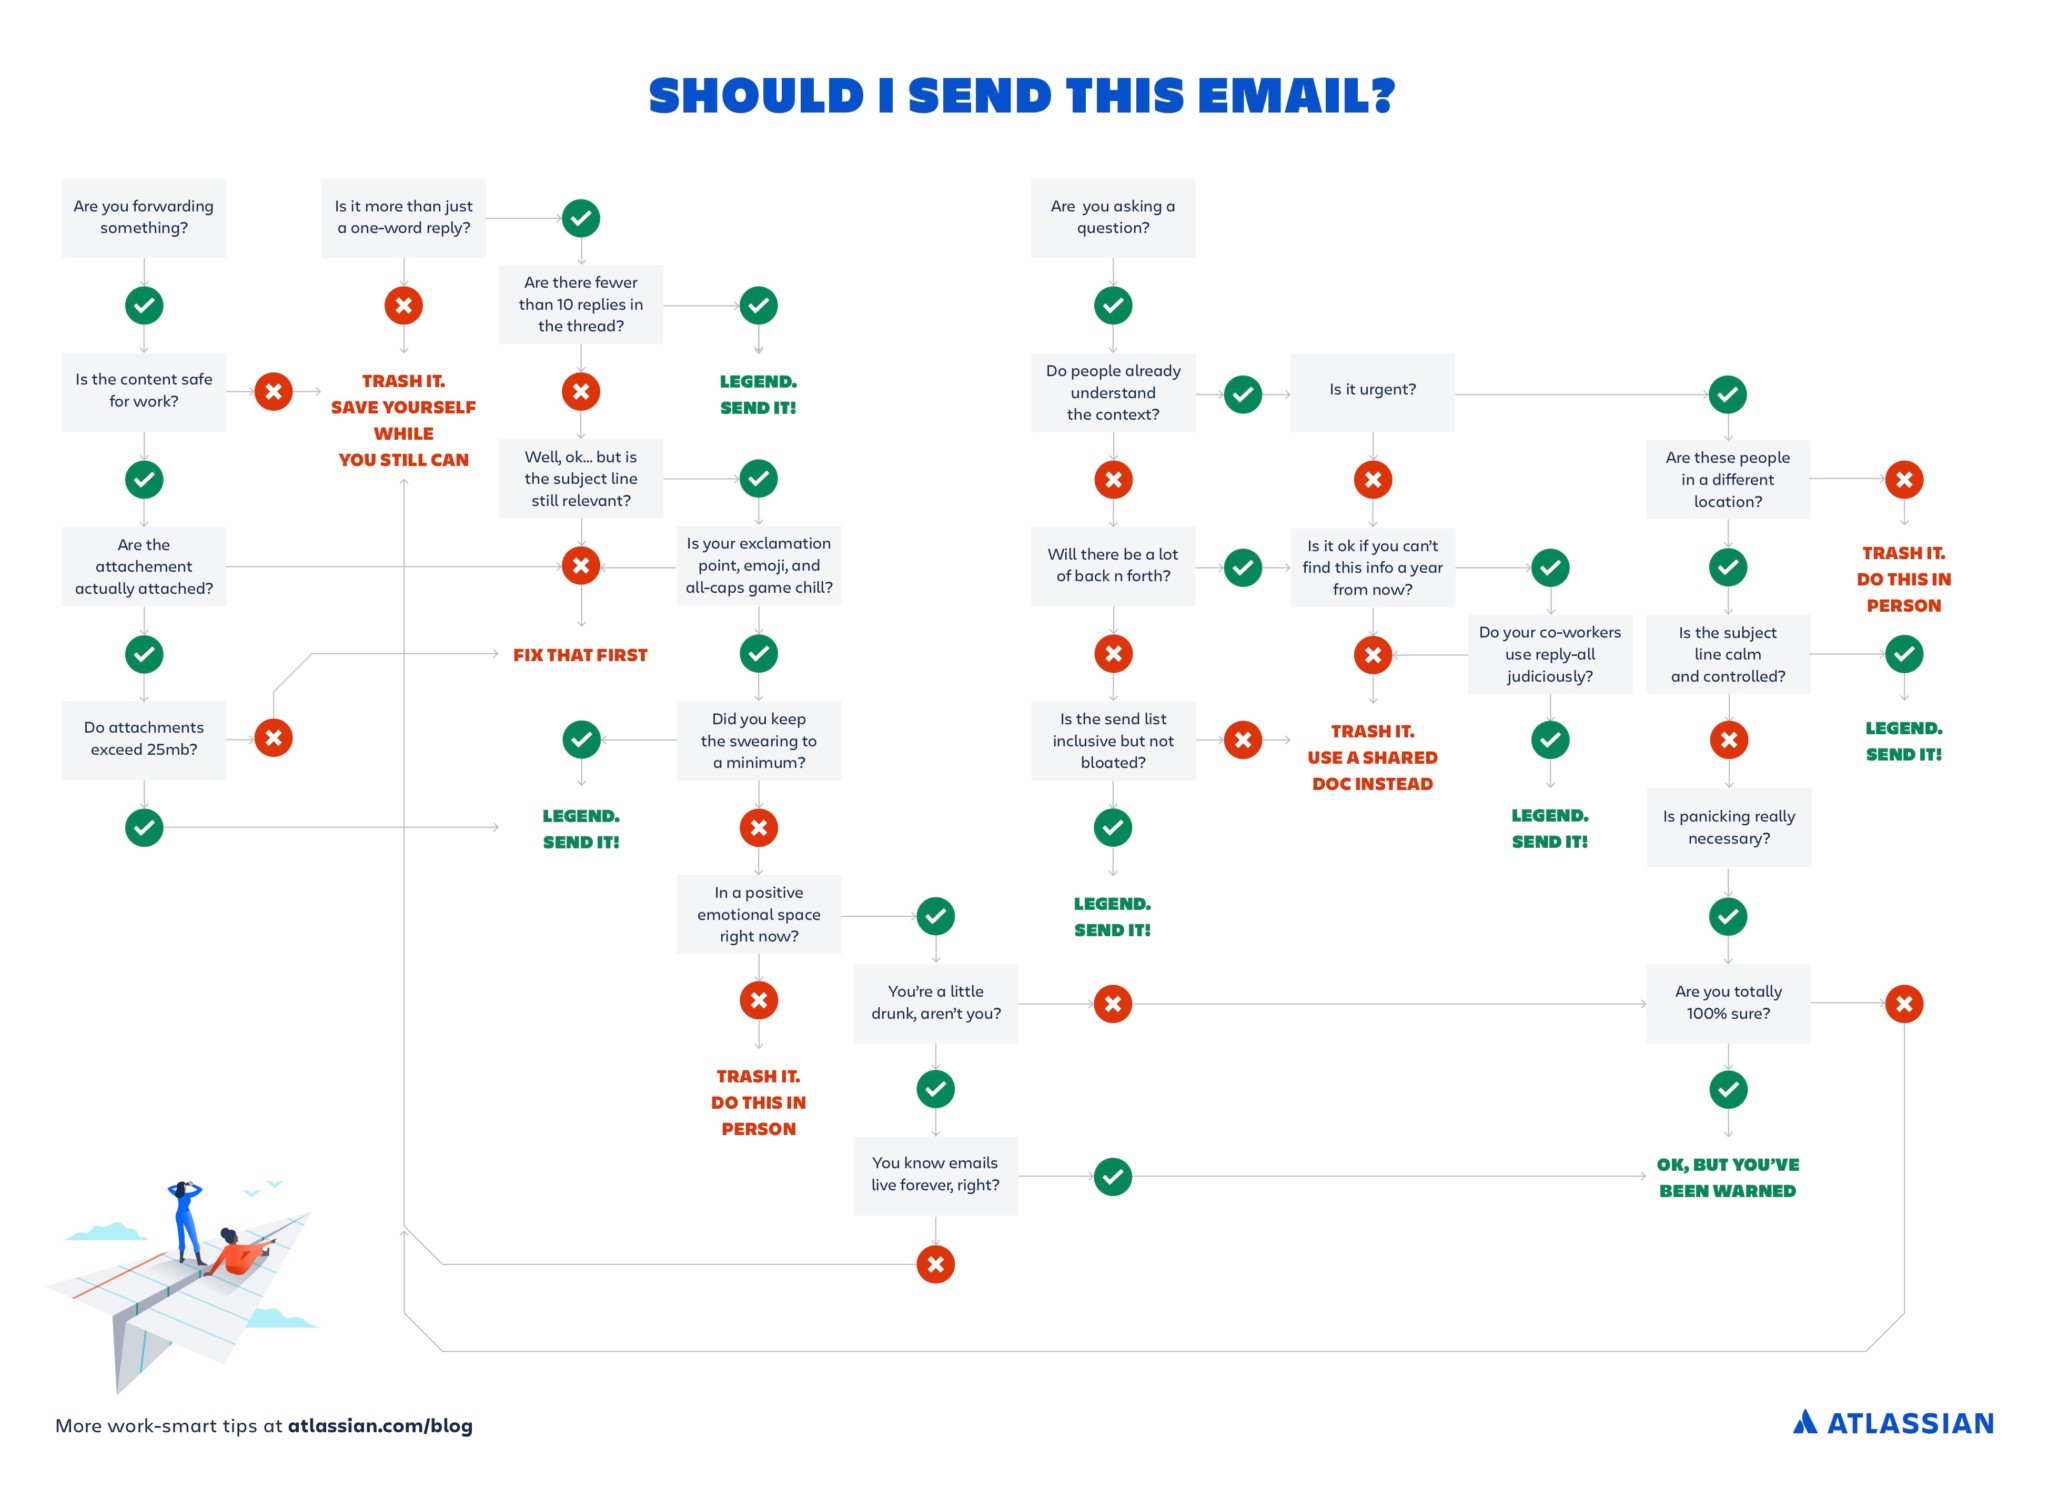 A flowchart to help you decide whether you really need to send that email